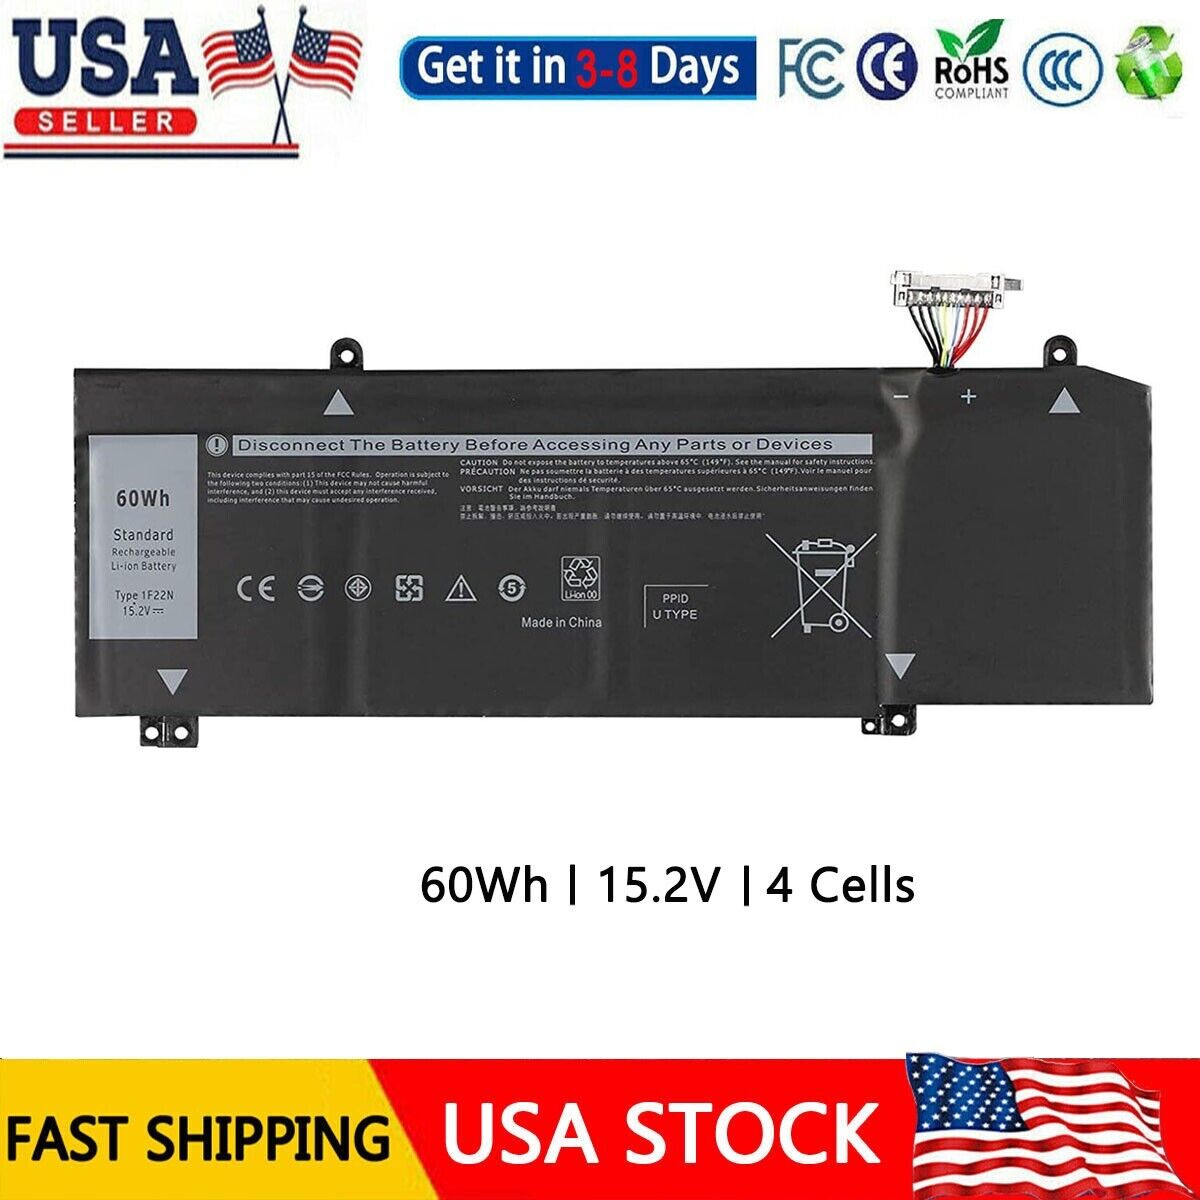 1F22N 60Wh Battery for Dell Alienware M15 M17 2018 G5 15 5590 G7 7590 7790 HYWXJ